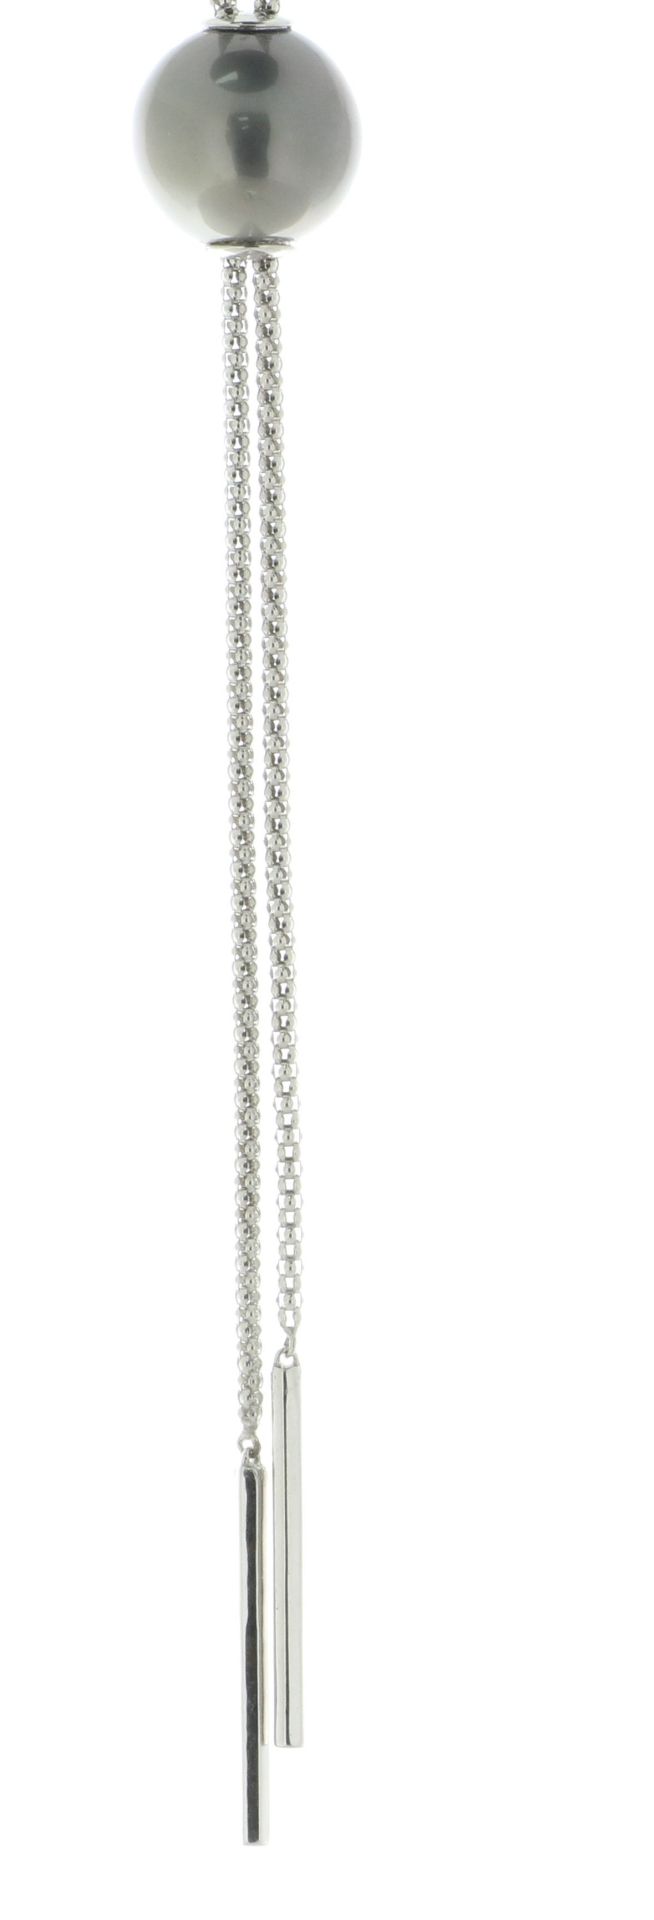 14mm Tahiti Pearl Necklace Moveable Pearl Sterling Silver Chain - Valued By AGI £690.00 - A 14mm - Image 2 of 7